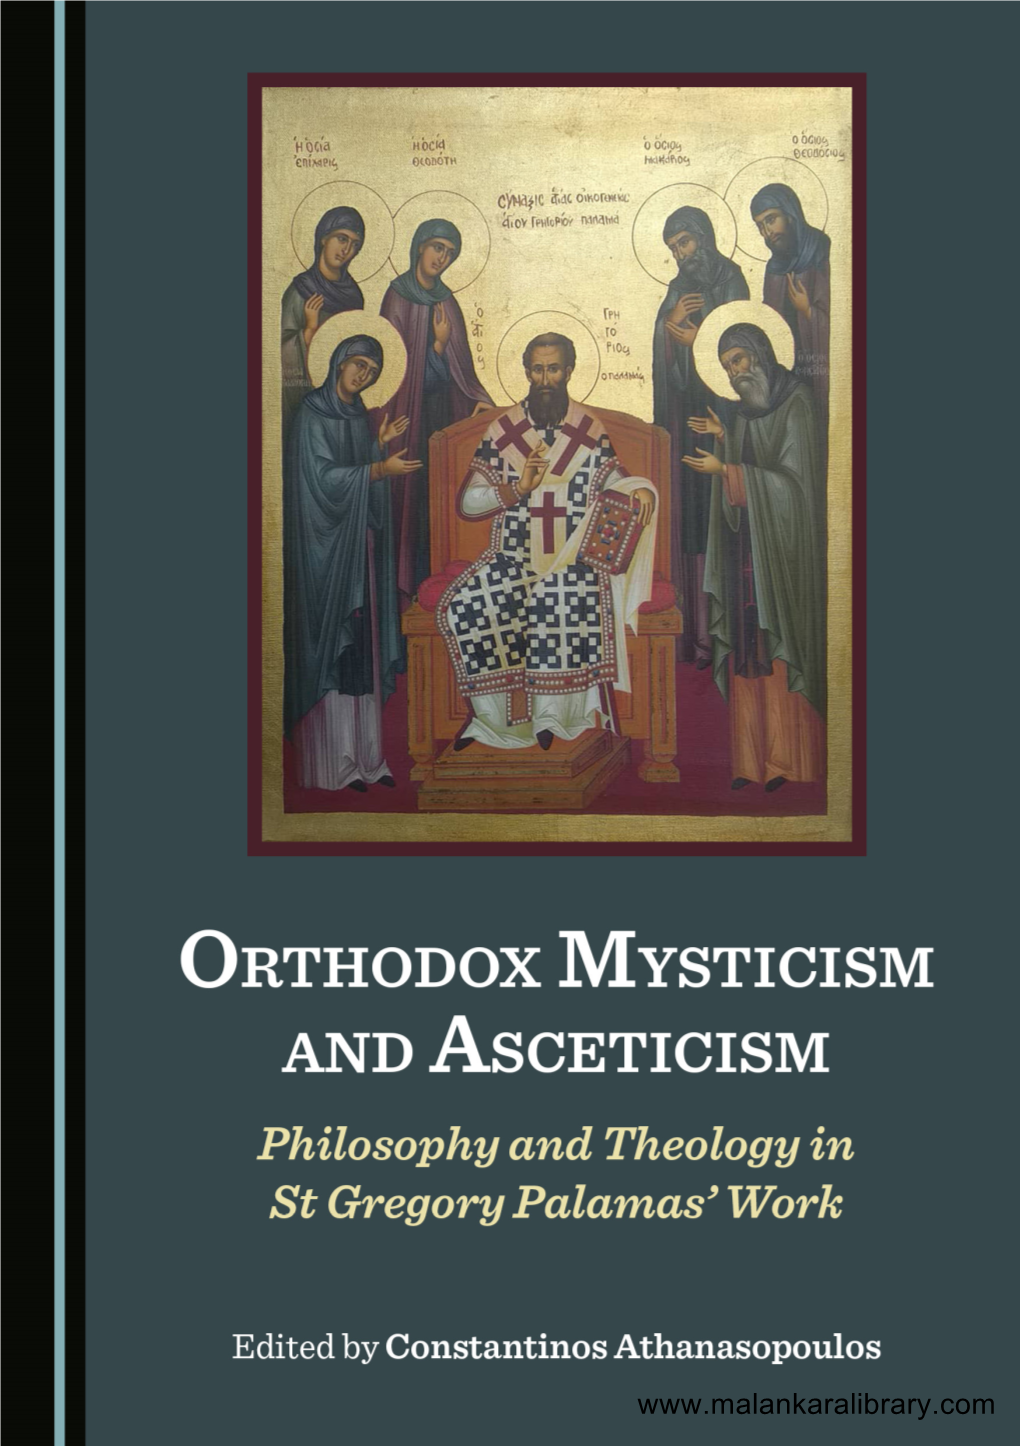 Philosophy and Theology in St Gregory Palamas’ Work